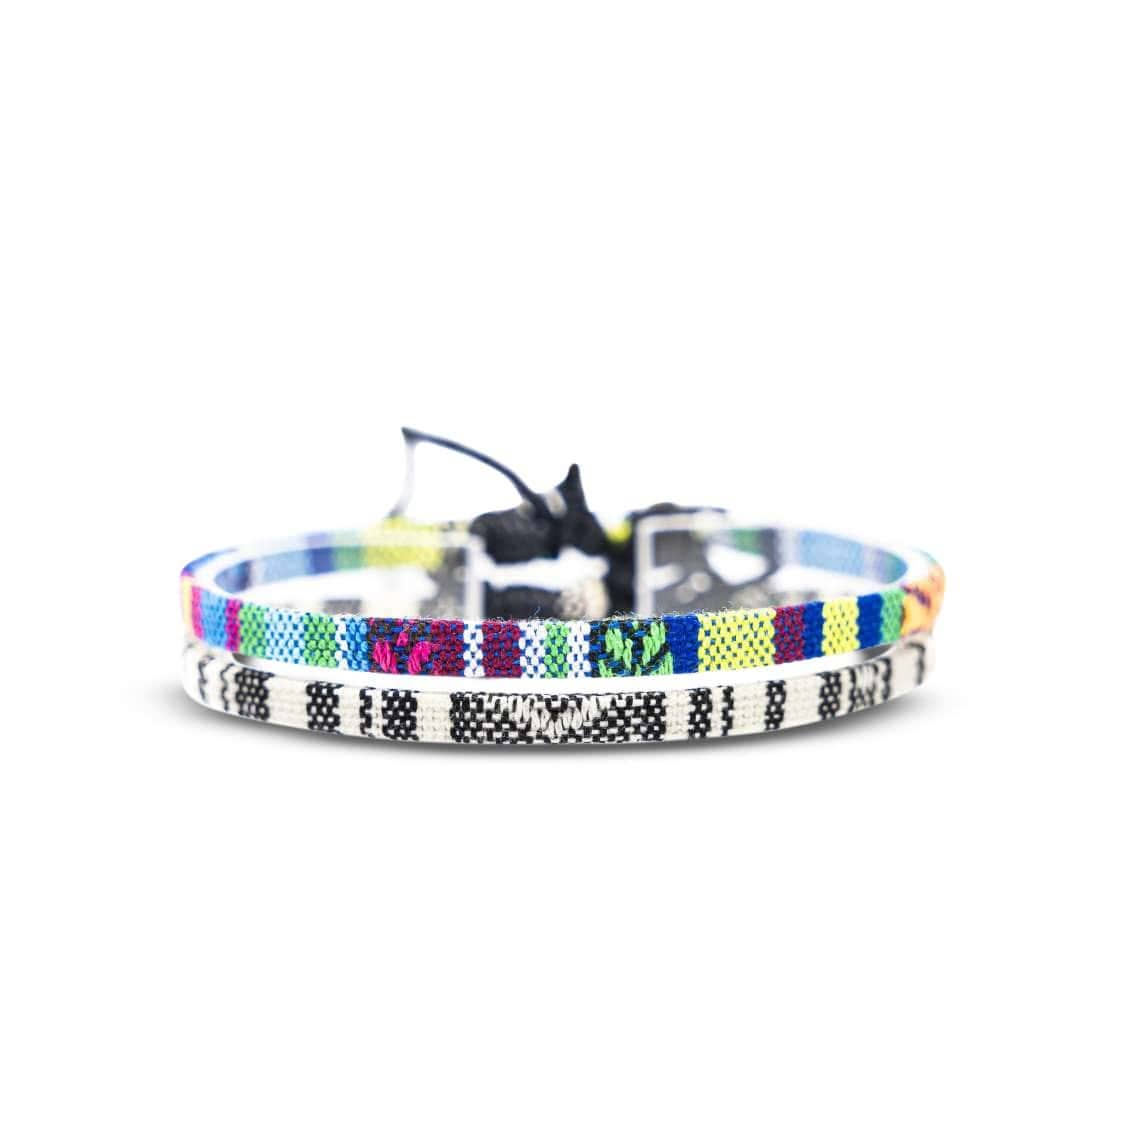 Bracelet Pack - Multi Color & Turquoise Beads – Made by Nami EU